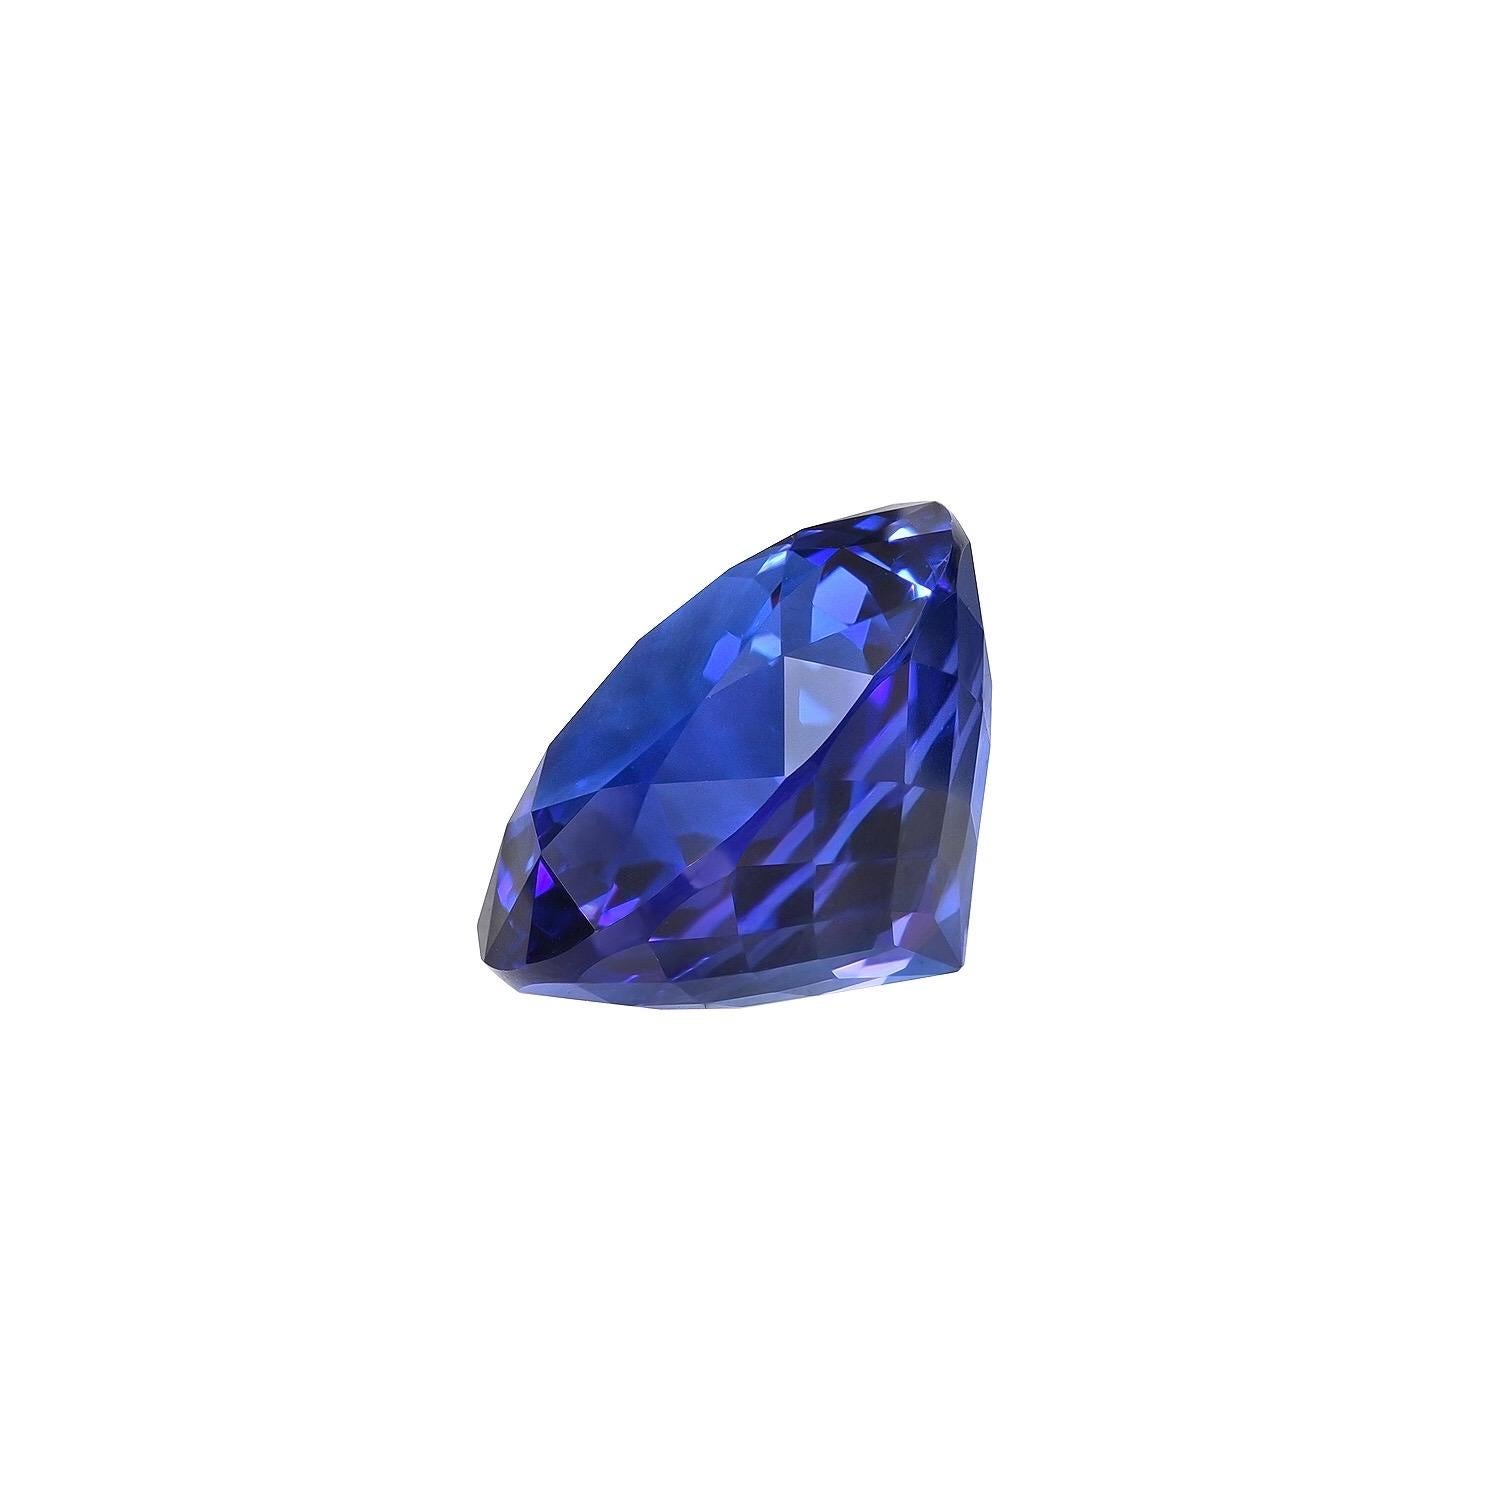 5.54 carat vivid Tanzanite round gem, offered loose to a gemstone lover.
Returns are accepted and paid by us within 7 days of delivery.
We offer supreme custom jewelry work upon request. Please contact us for more details.
For your convenience we